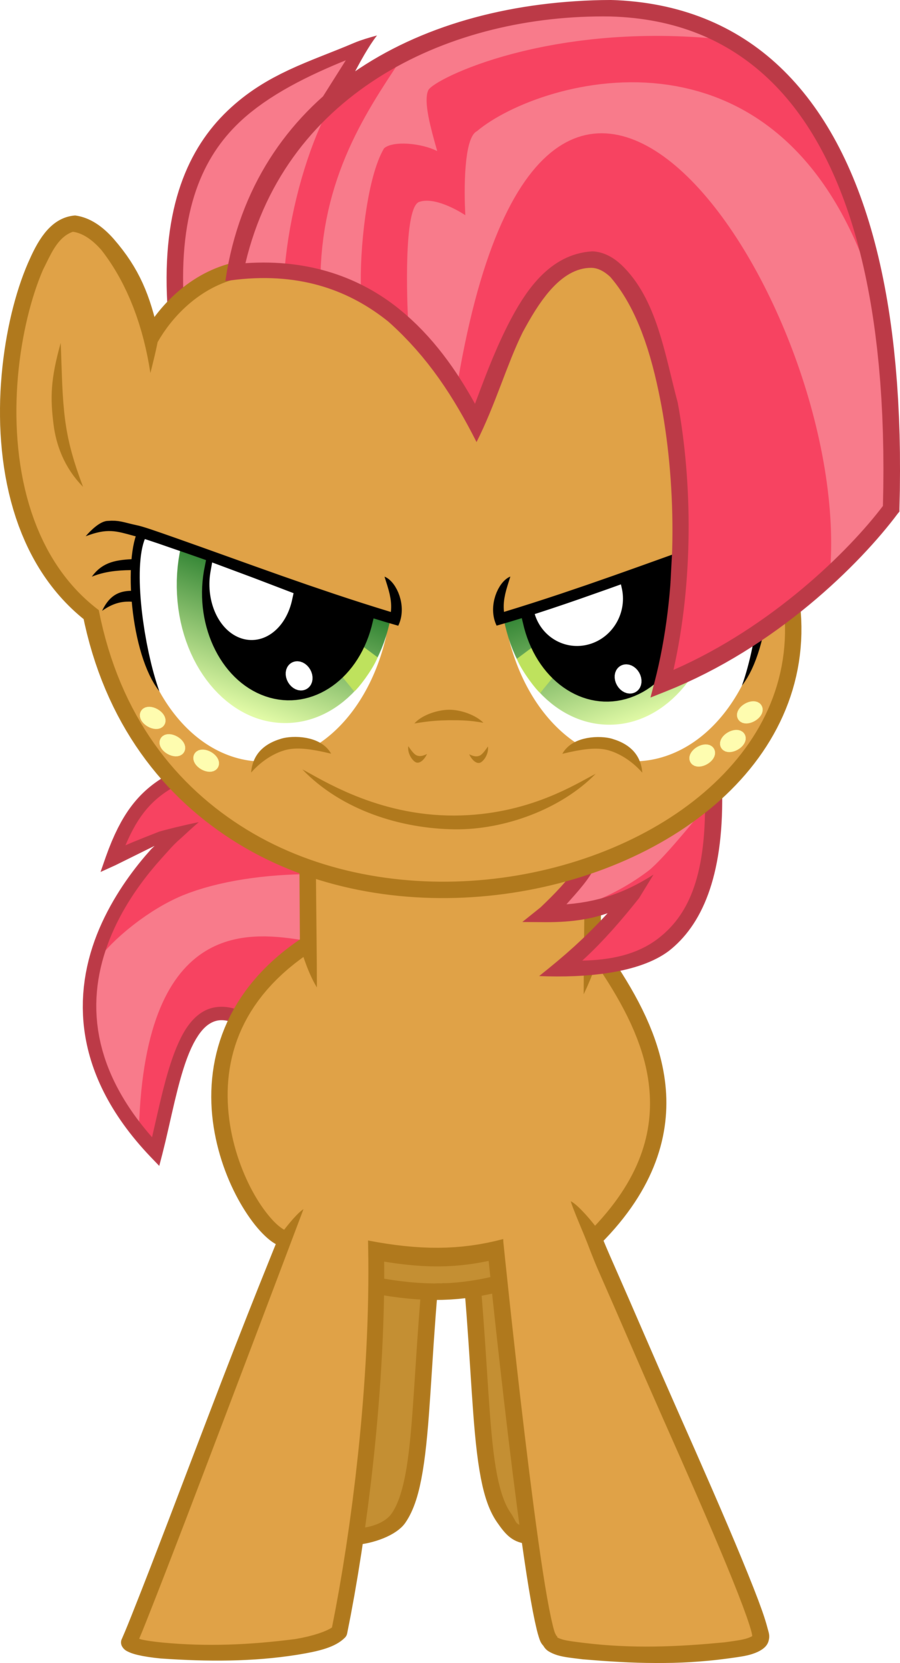 Download Babs Seed Vector By Cellistoctavia-d5m5o8a - Mlp Babs Seed Vector  PNG Image with No Background 